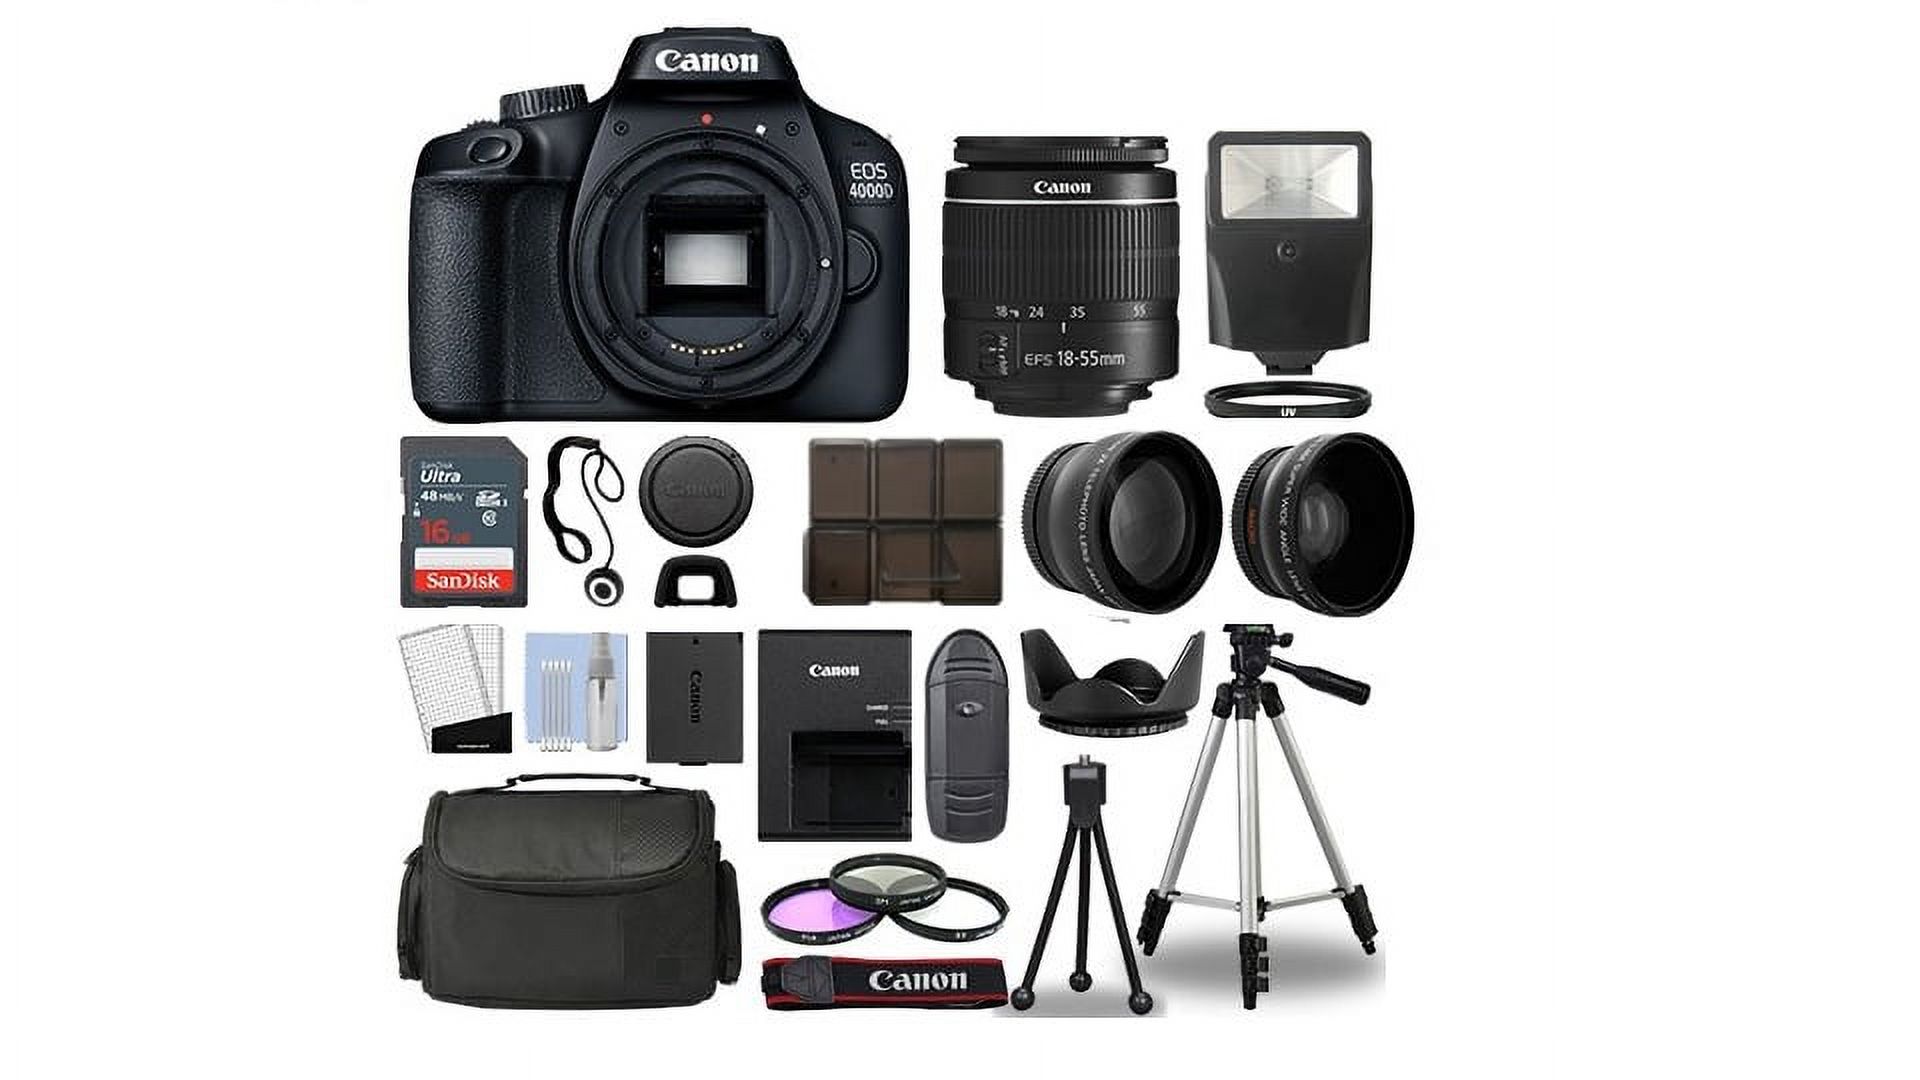 Canon EOS 2000D Rebel T7 Kit with EF-S 18-55mm f/3.5-5.6 III Lens + Accessory Bundle +One Stop Shop Deals Cloth - image 1 of 1